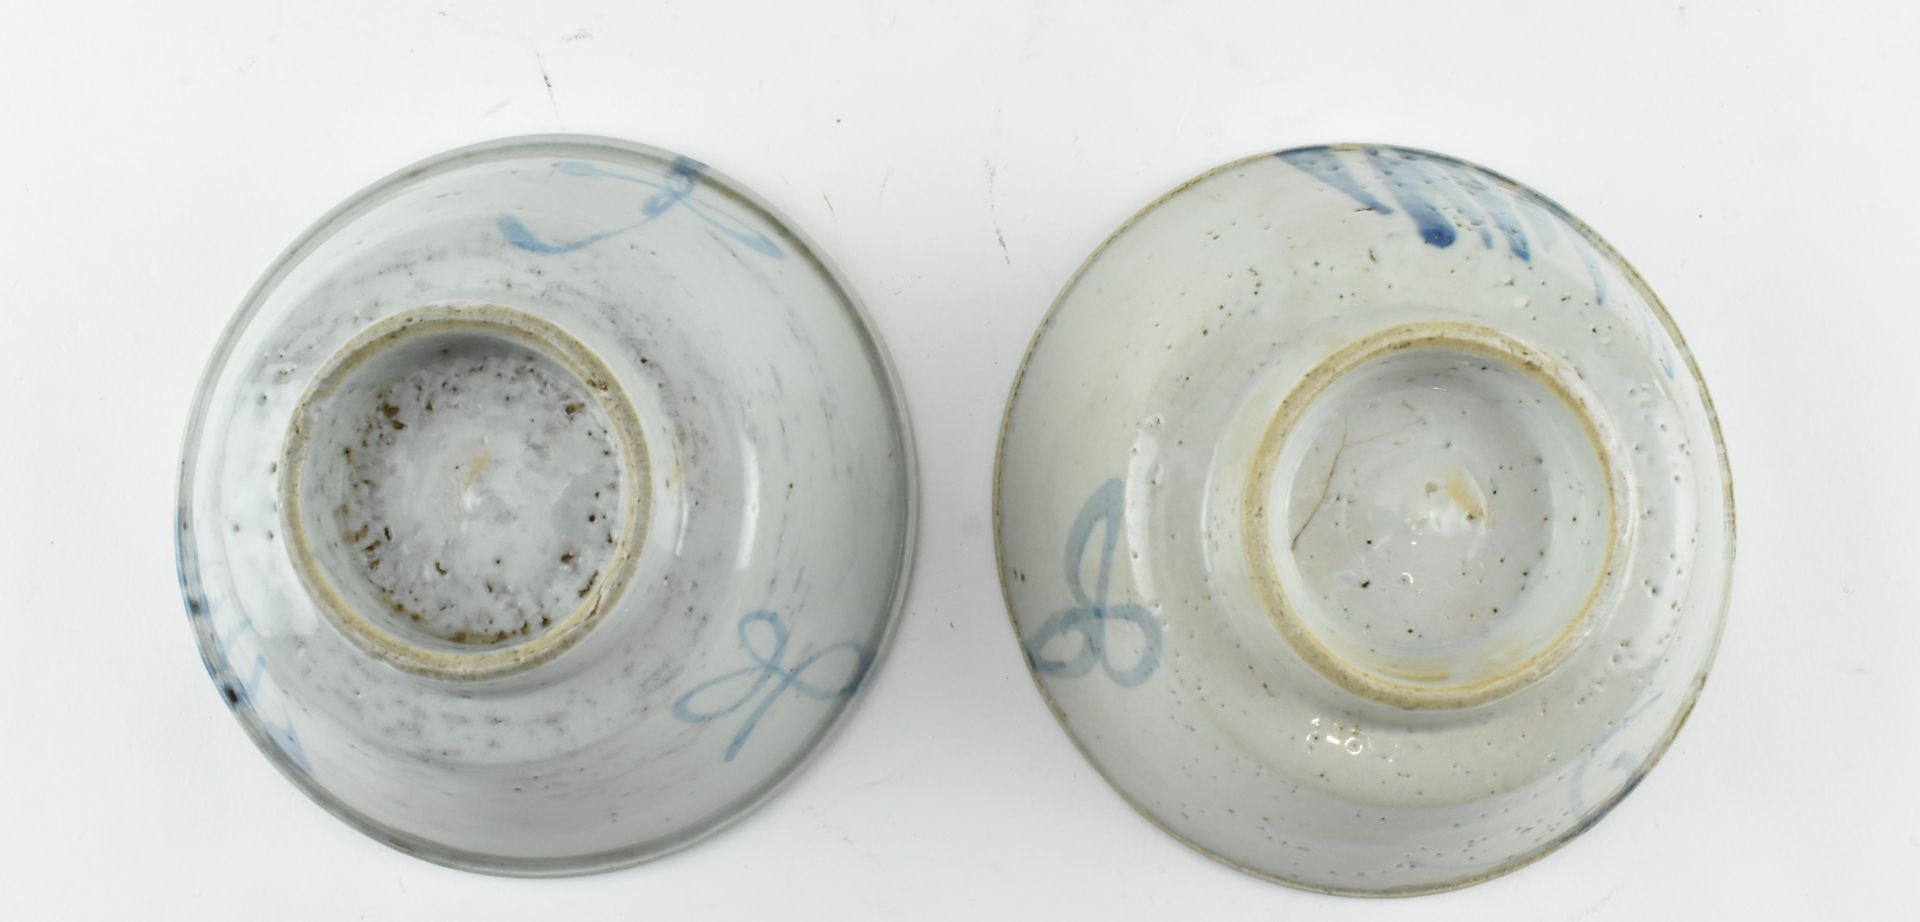 TWO ZHANGZHOU SWATOW WARE BLUE AND WHITE BOWLS 汕头碗两个 - Image 5 of 7